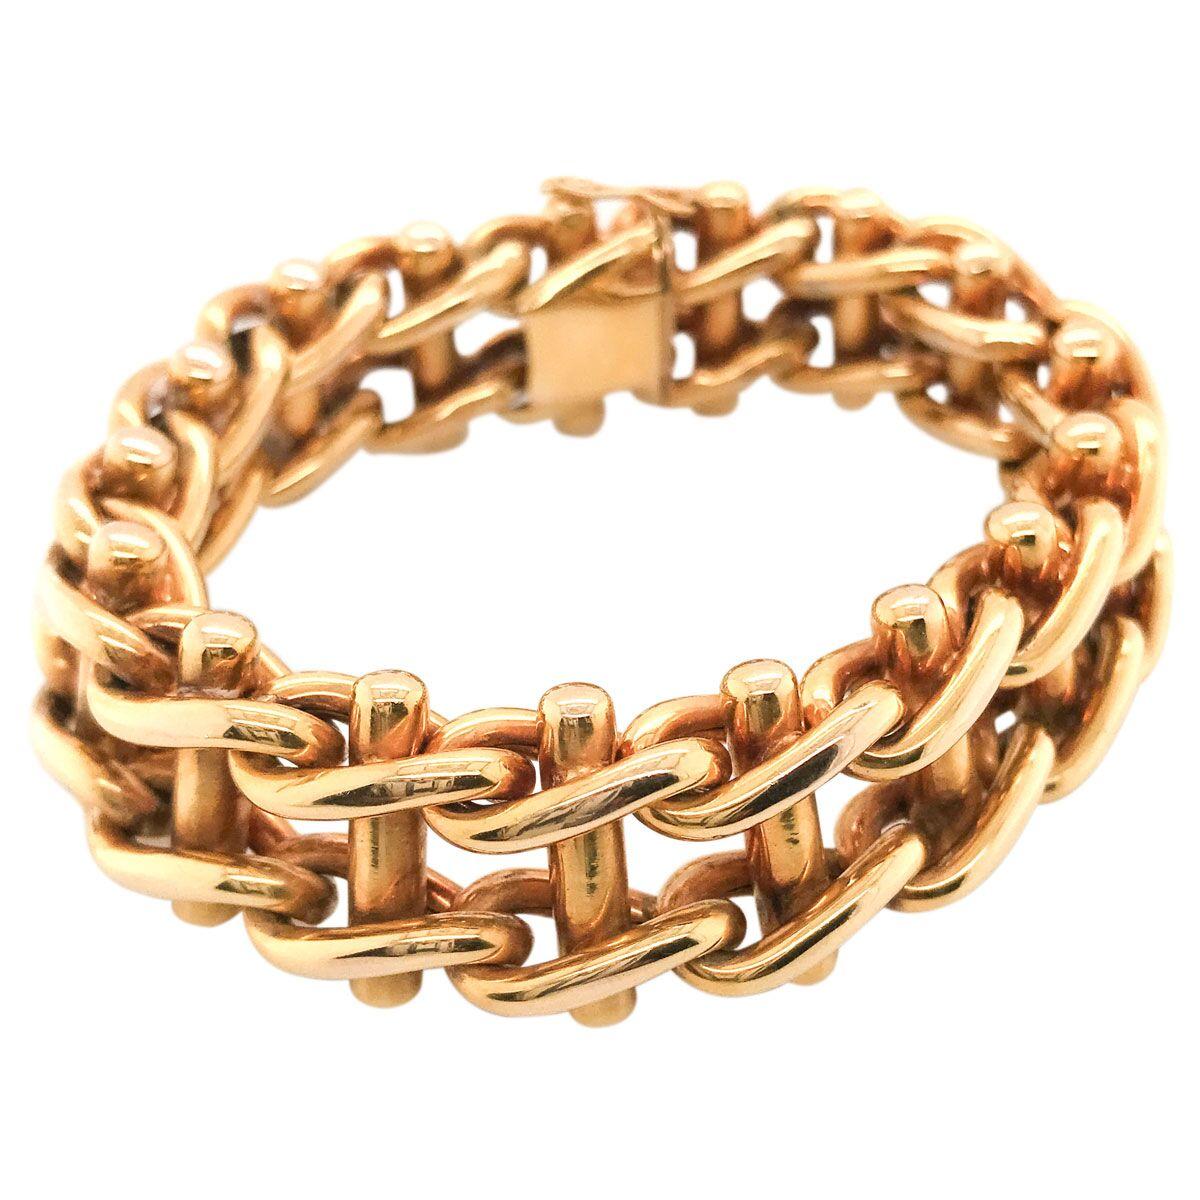 A series of curb links and bars makes this beautiful 18k yellow gold French ladder bracelet a standout! One of my favorite pieces in the collection at the moment, its flexible, wearable and very stylish - what more can you ask for. Fashioned in 18k